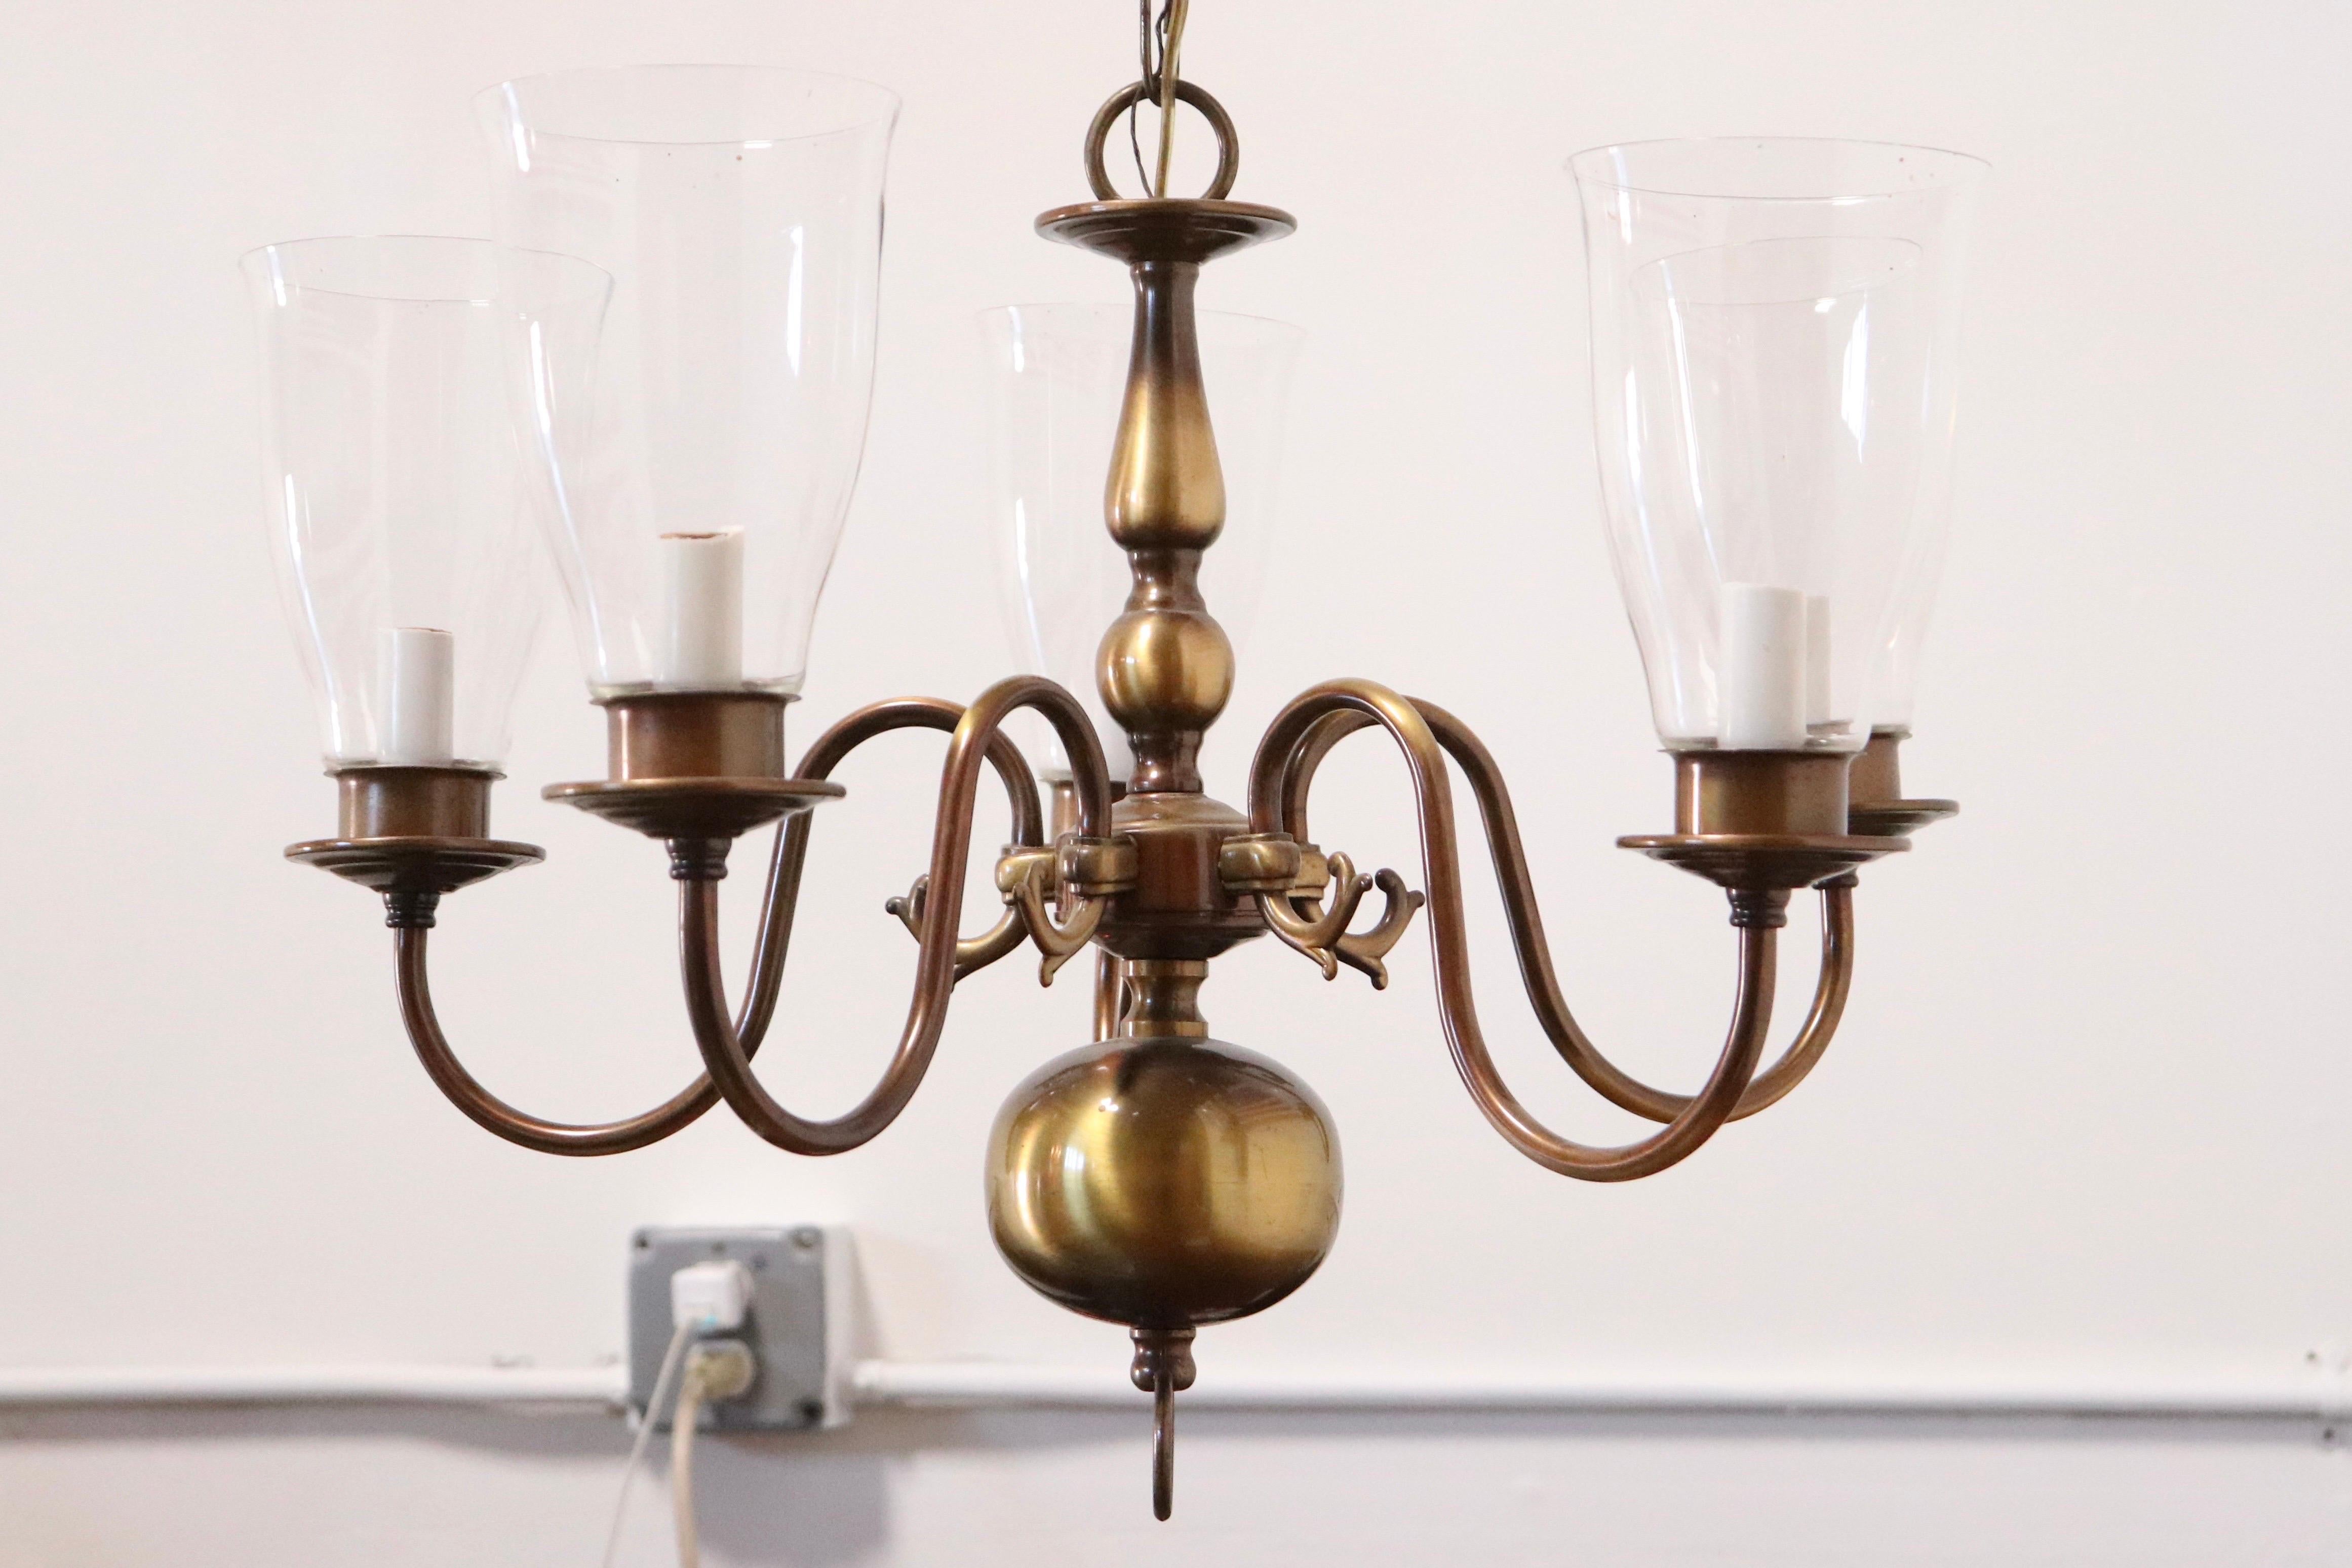 Georgian-style medium-size chandelier with 5 electrified arms holding clear glass hurricane shades, in polished brass.

Features classic English design elements including urn shape in the post and large globe below, with each curved scroll arm